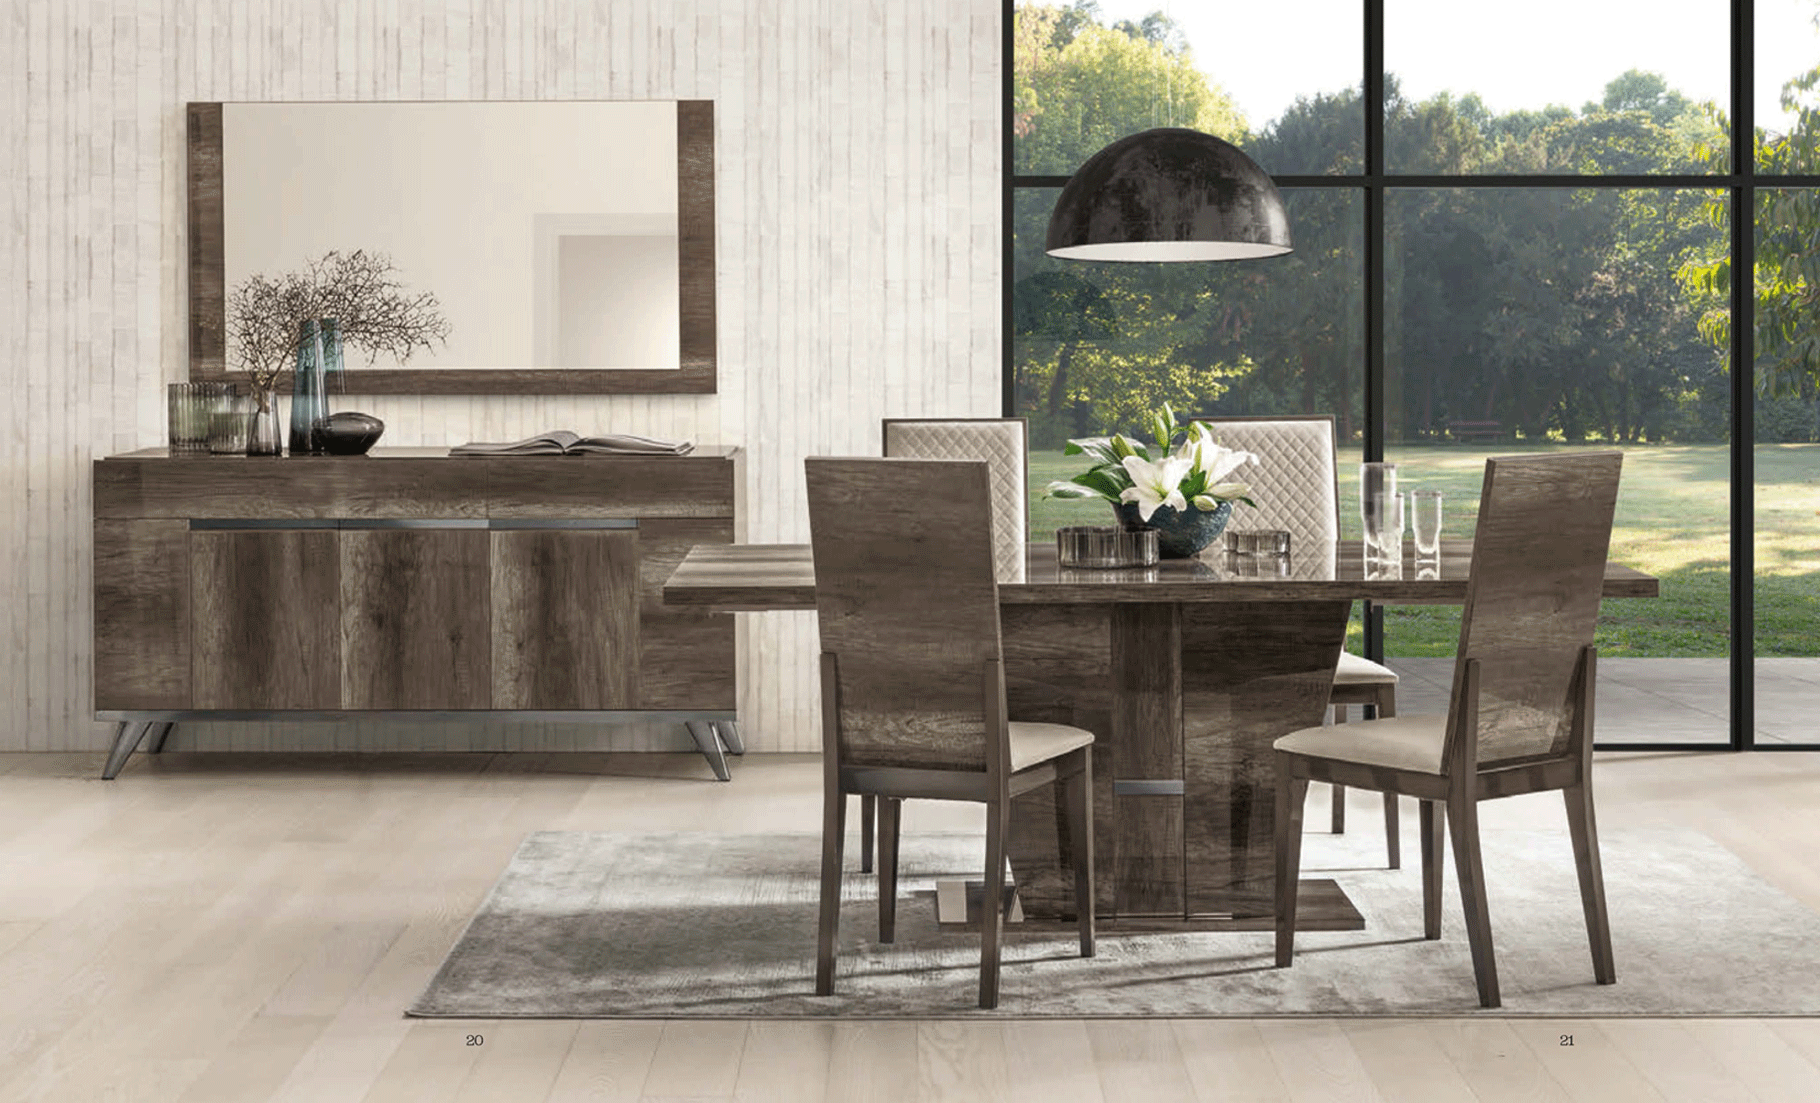 Clearance Dining Room Medea Day Additional Items